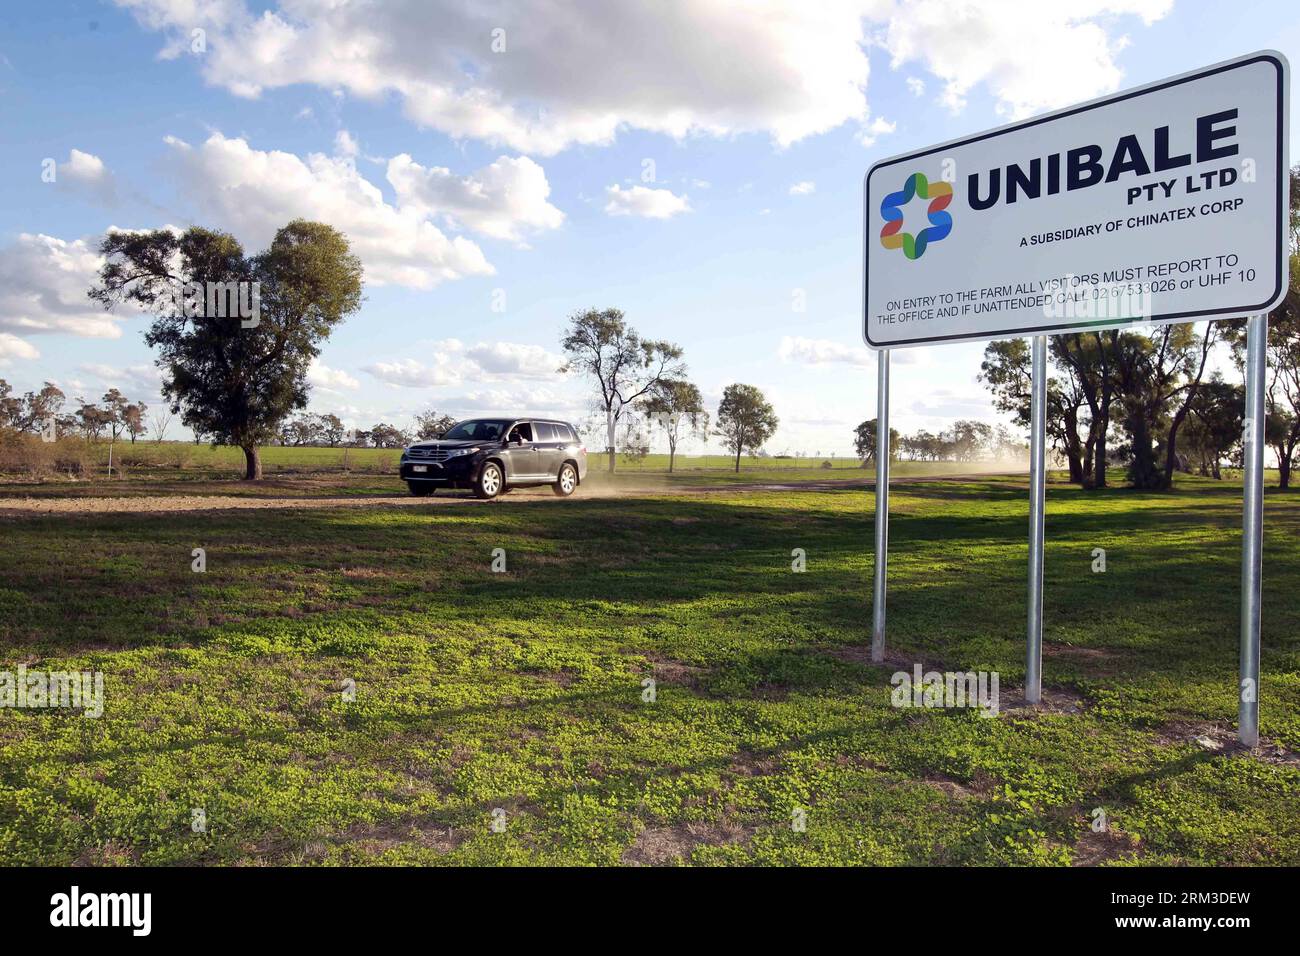 Bildnummer: 60154770  Datum: 17.07.2013  Copyright: imago/Xinhua SYDNEY, July 17 2013 - A vehicle runs past the entrance of UNIBALE, a subsidiary of Chinatex Corporation, in Moree, New South Wales, Australia, on July 17, 2013. Chinatex Corporation purchased the cotton base to plant cotton in Moree in early 1990s. The base, covering an area of 5,200 hectares, owns the anual productivity of more than 2,700,000 kg unginned cotton and provides mainly for Chinatex Corporation and partly for international market. (Xinhua/Jin Linpeng) (lr) AUSTRALIA-NEW SOUTH WALES-MOREE-CHINATEX CORP-COTTON BASE-UNI Stock Photo